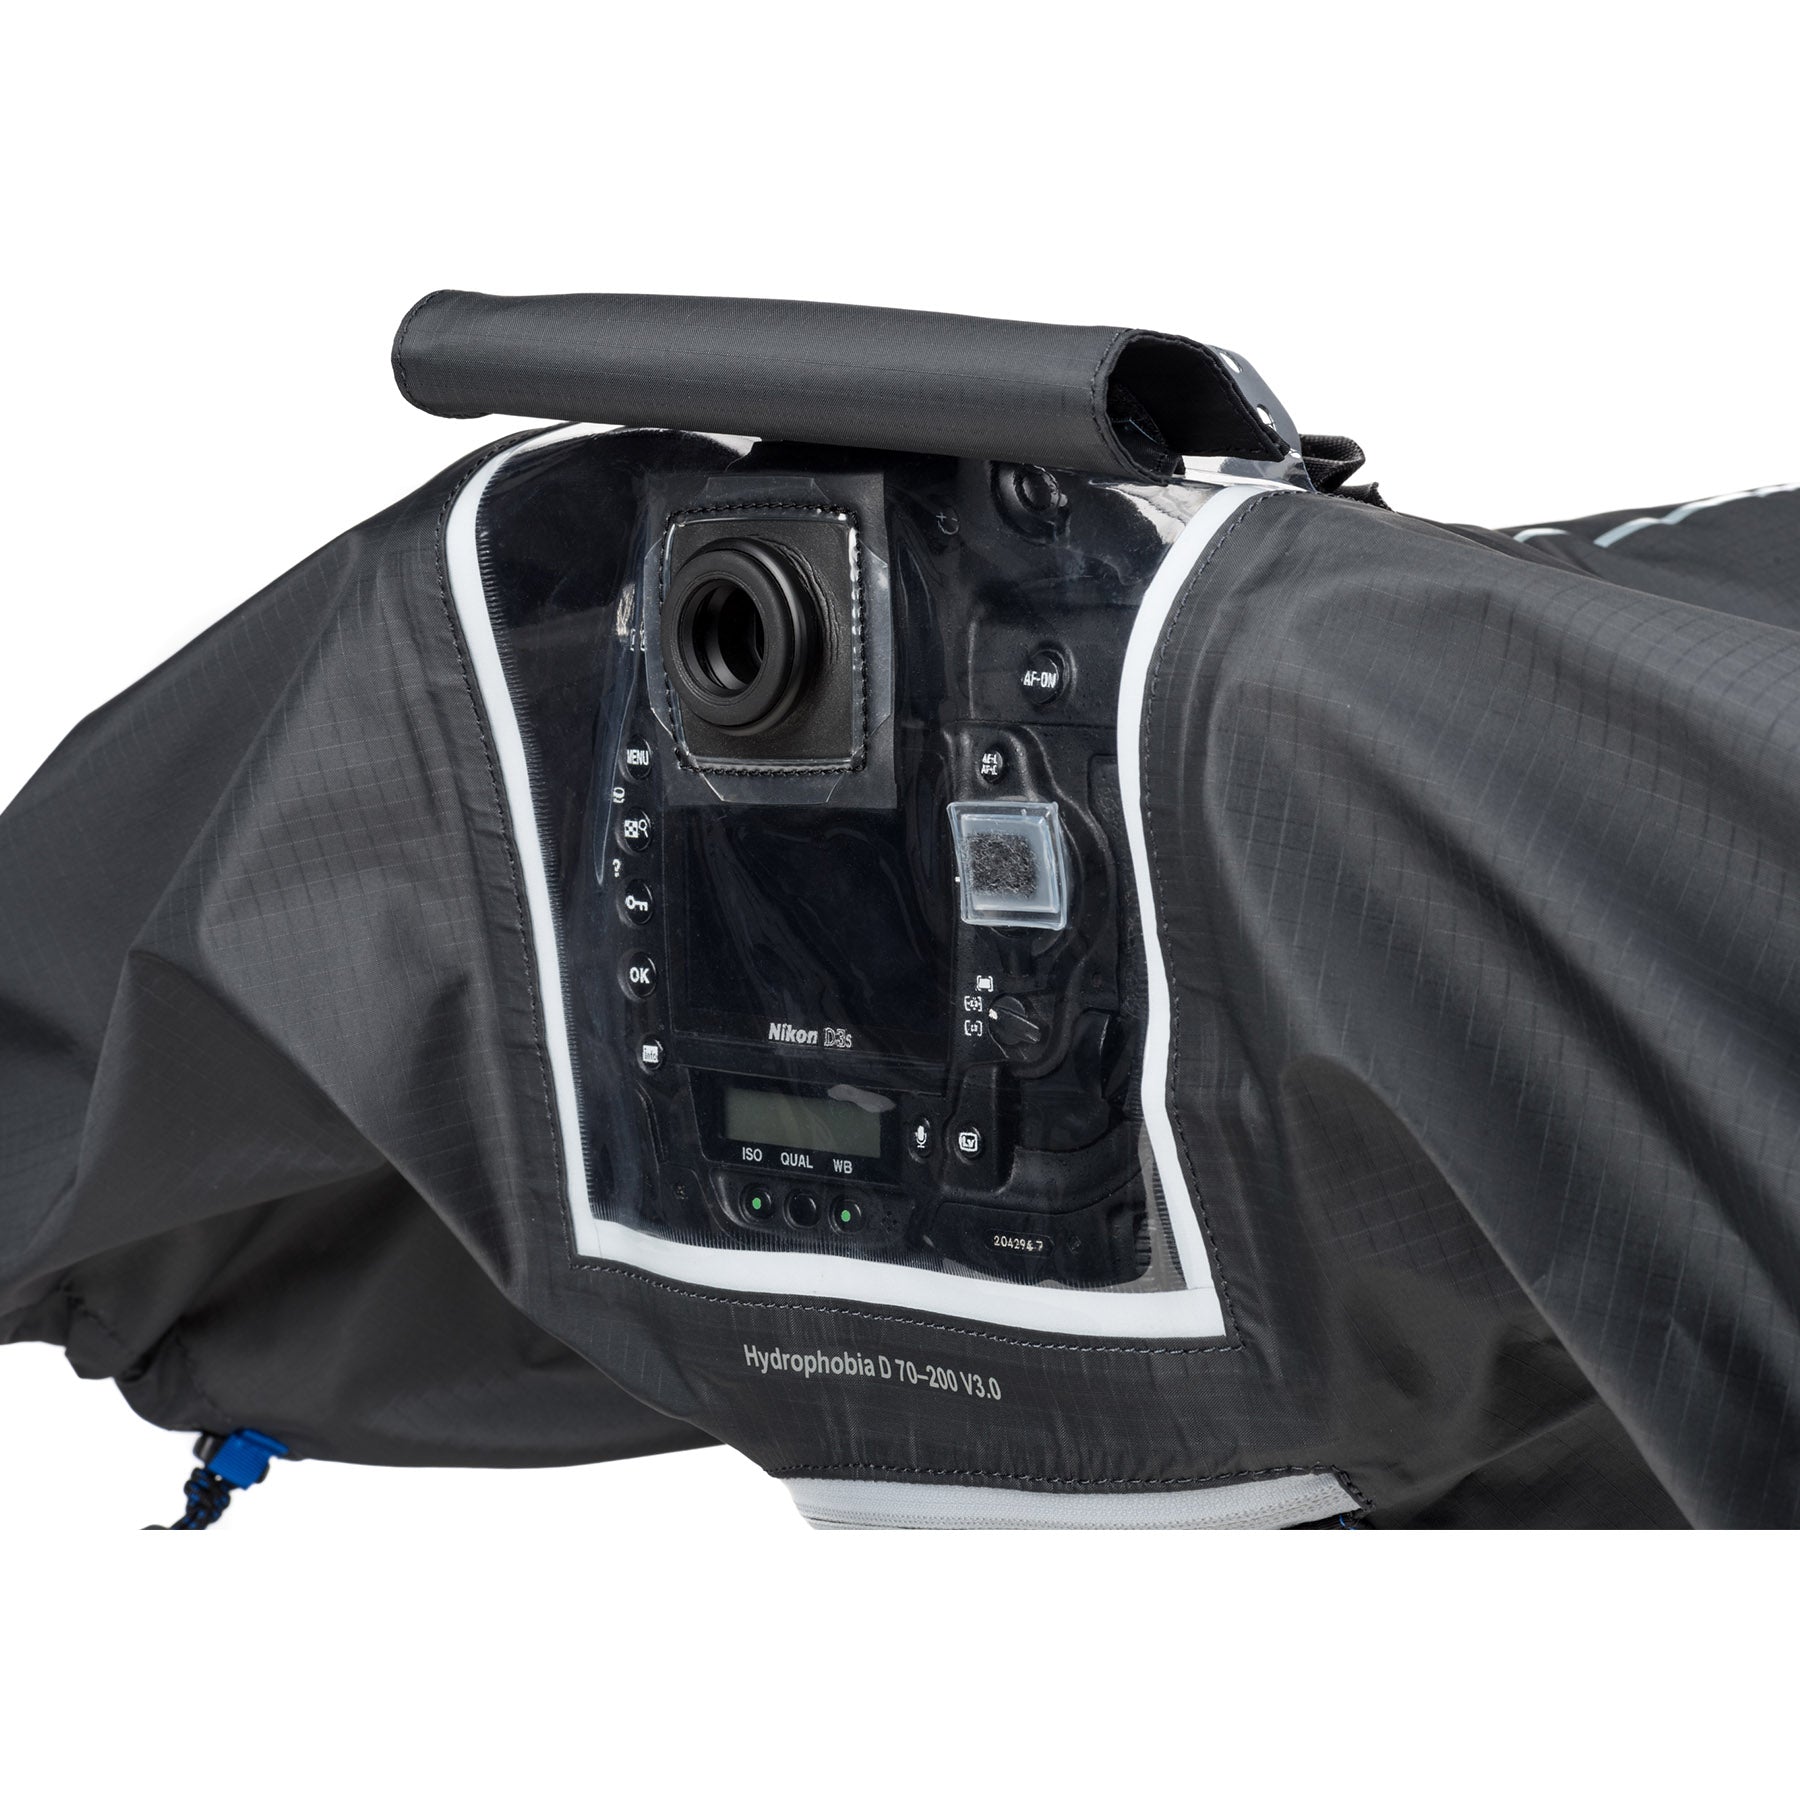 Eyepiece flap folds into a visor or, when not in use, shields viewfinder from rain or dust